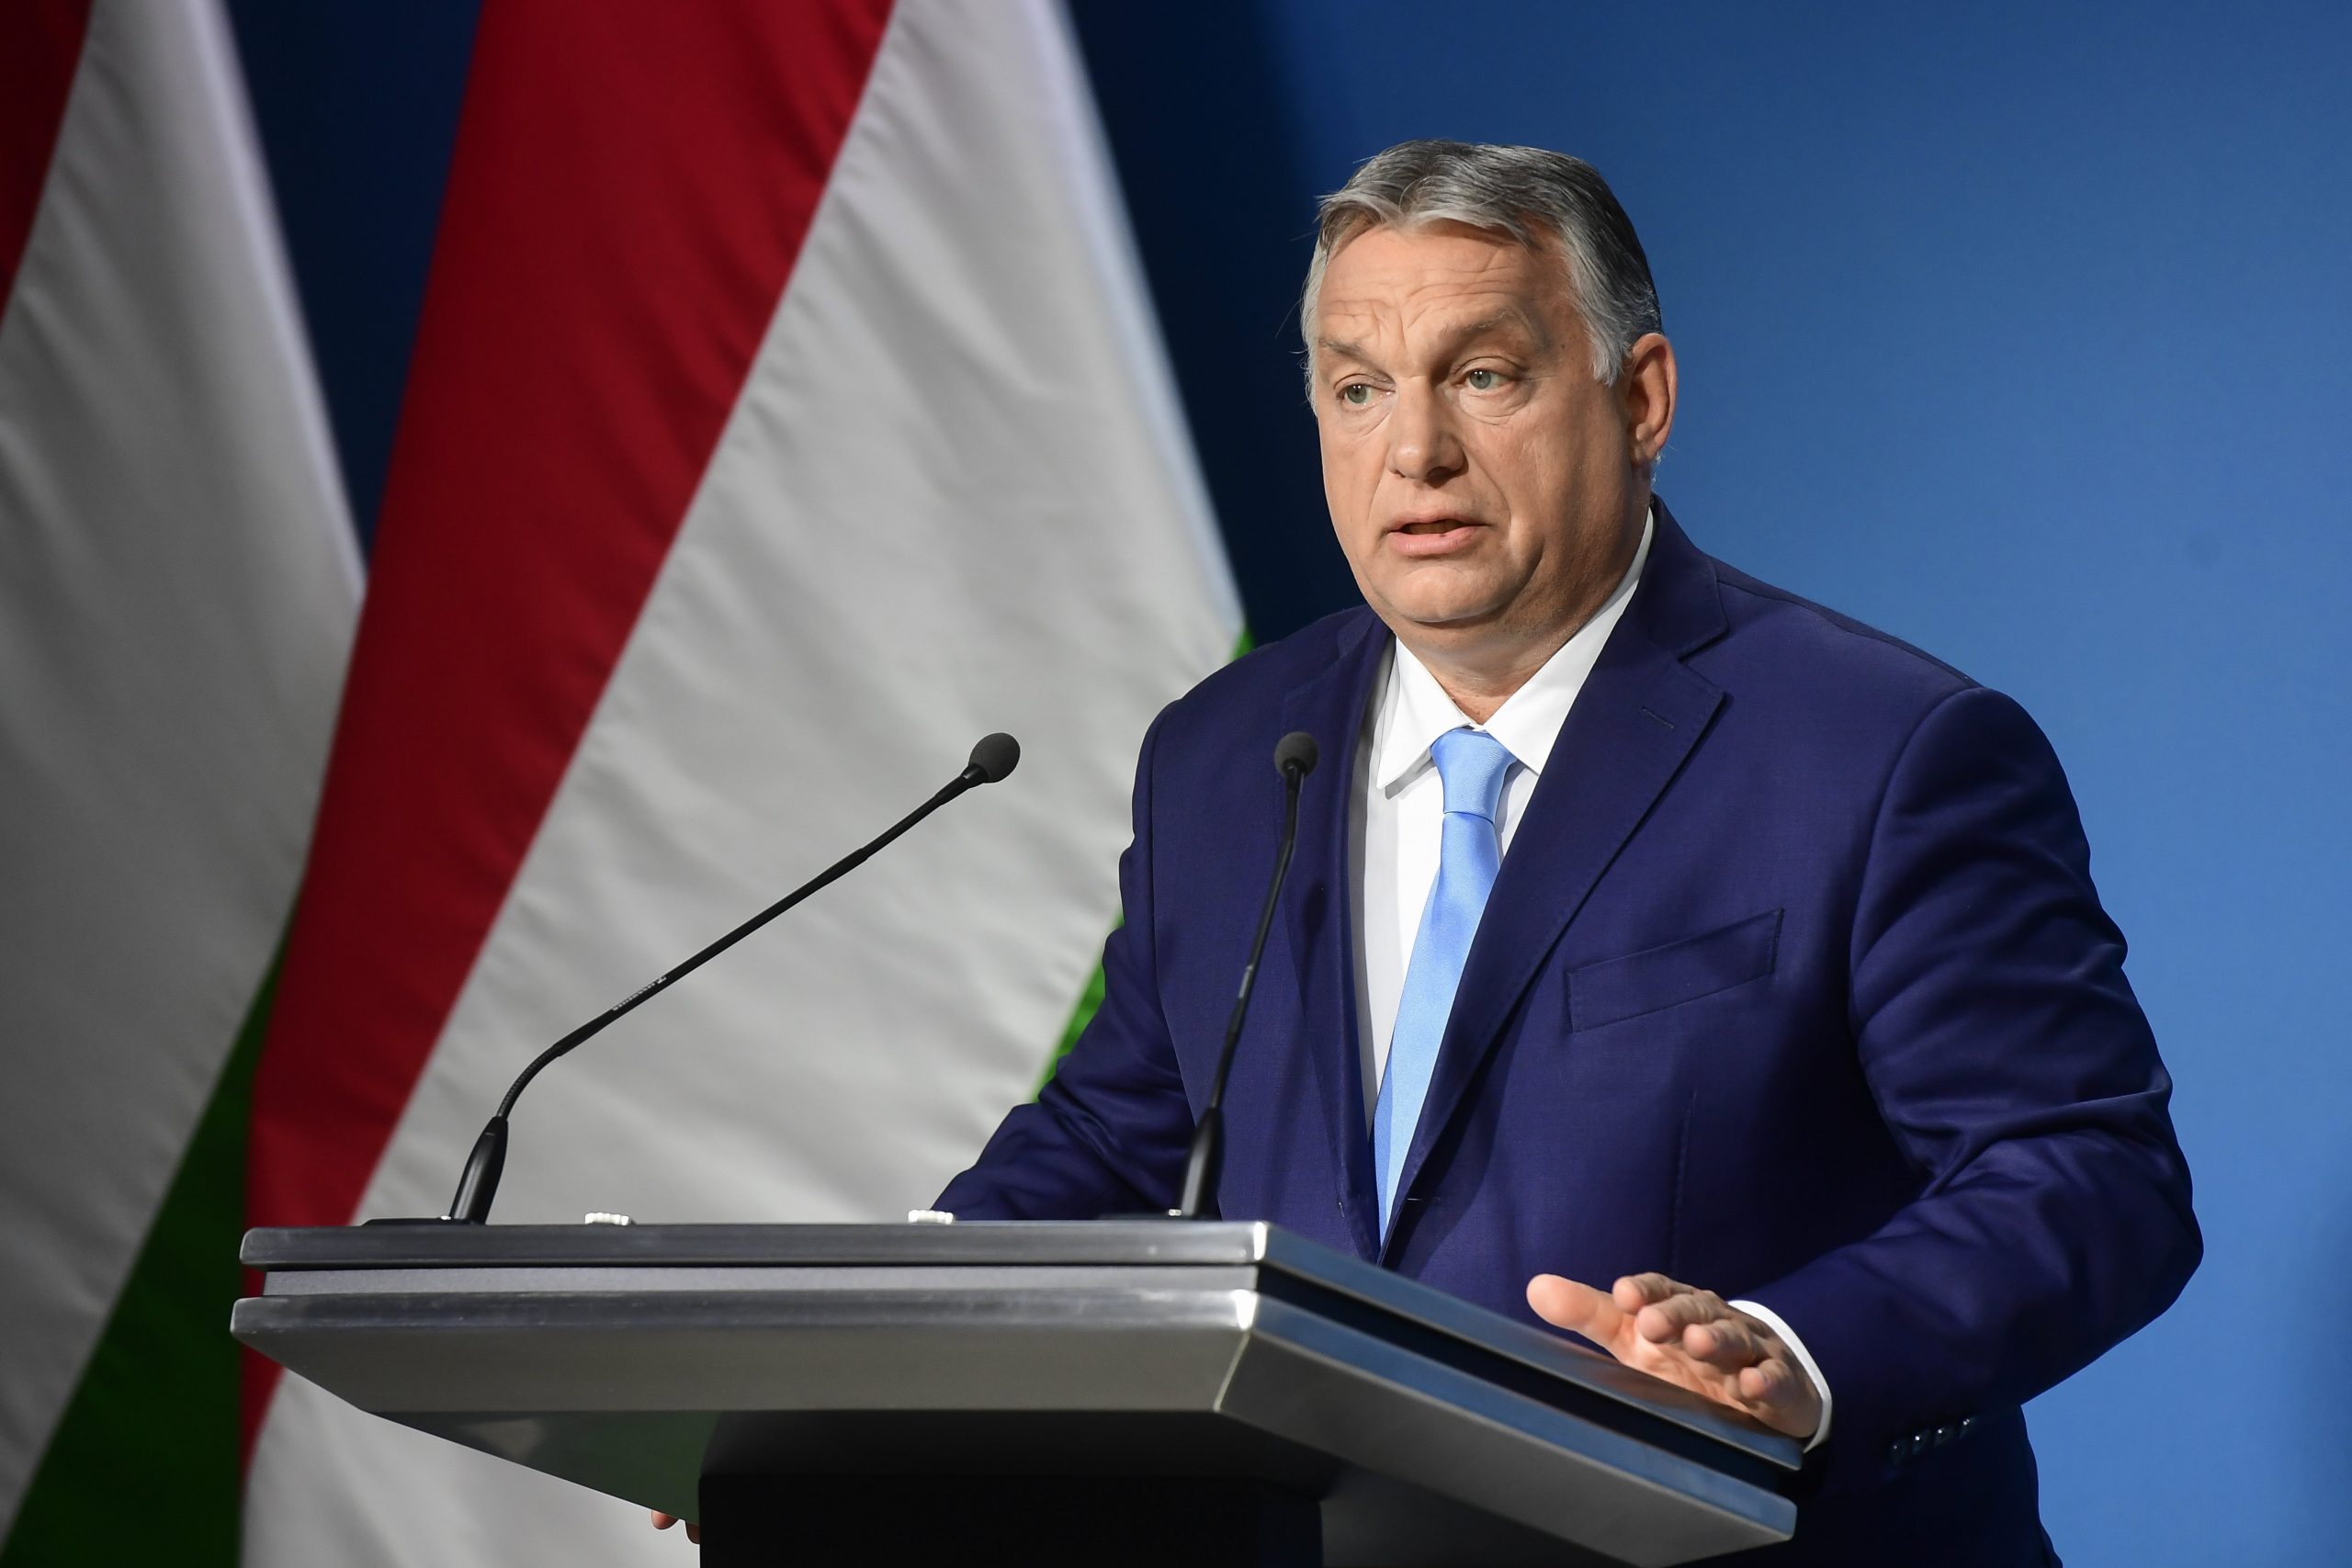 Orbán: Irish Footballers Bending Knee Before Hungary Match 'Provocation'